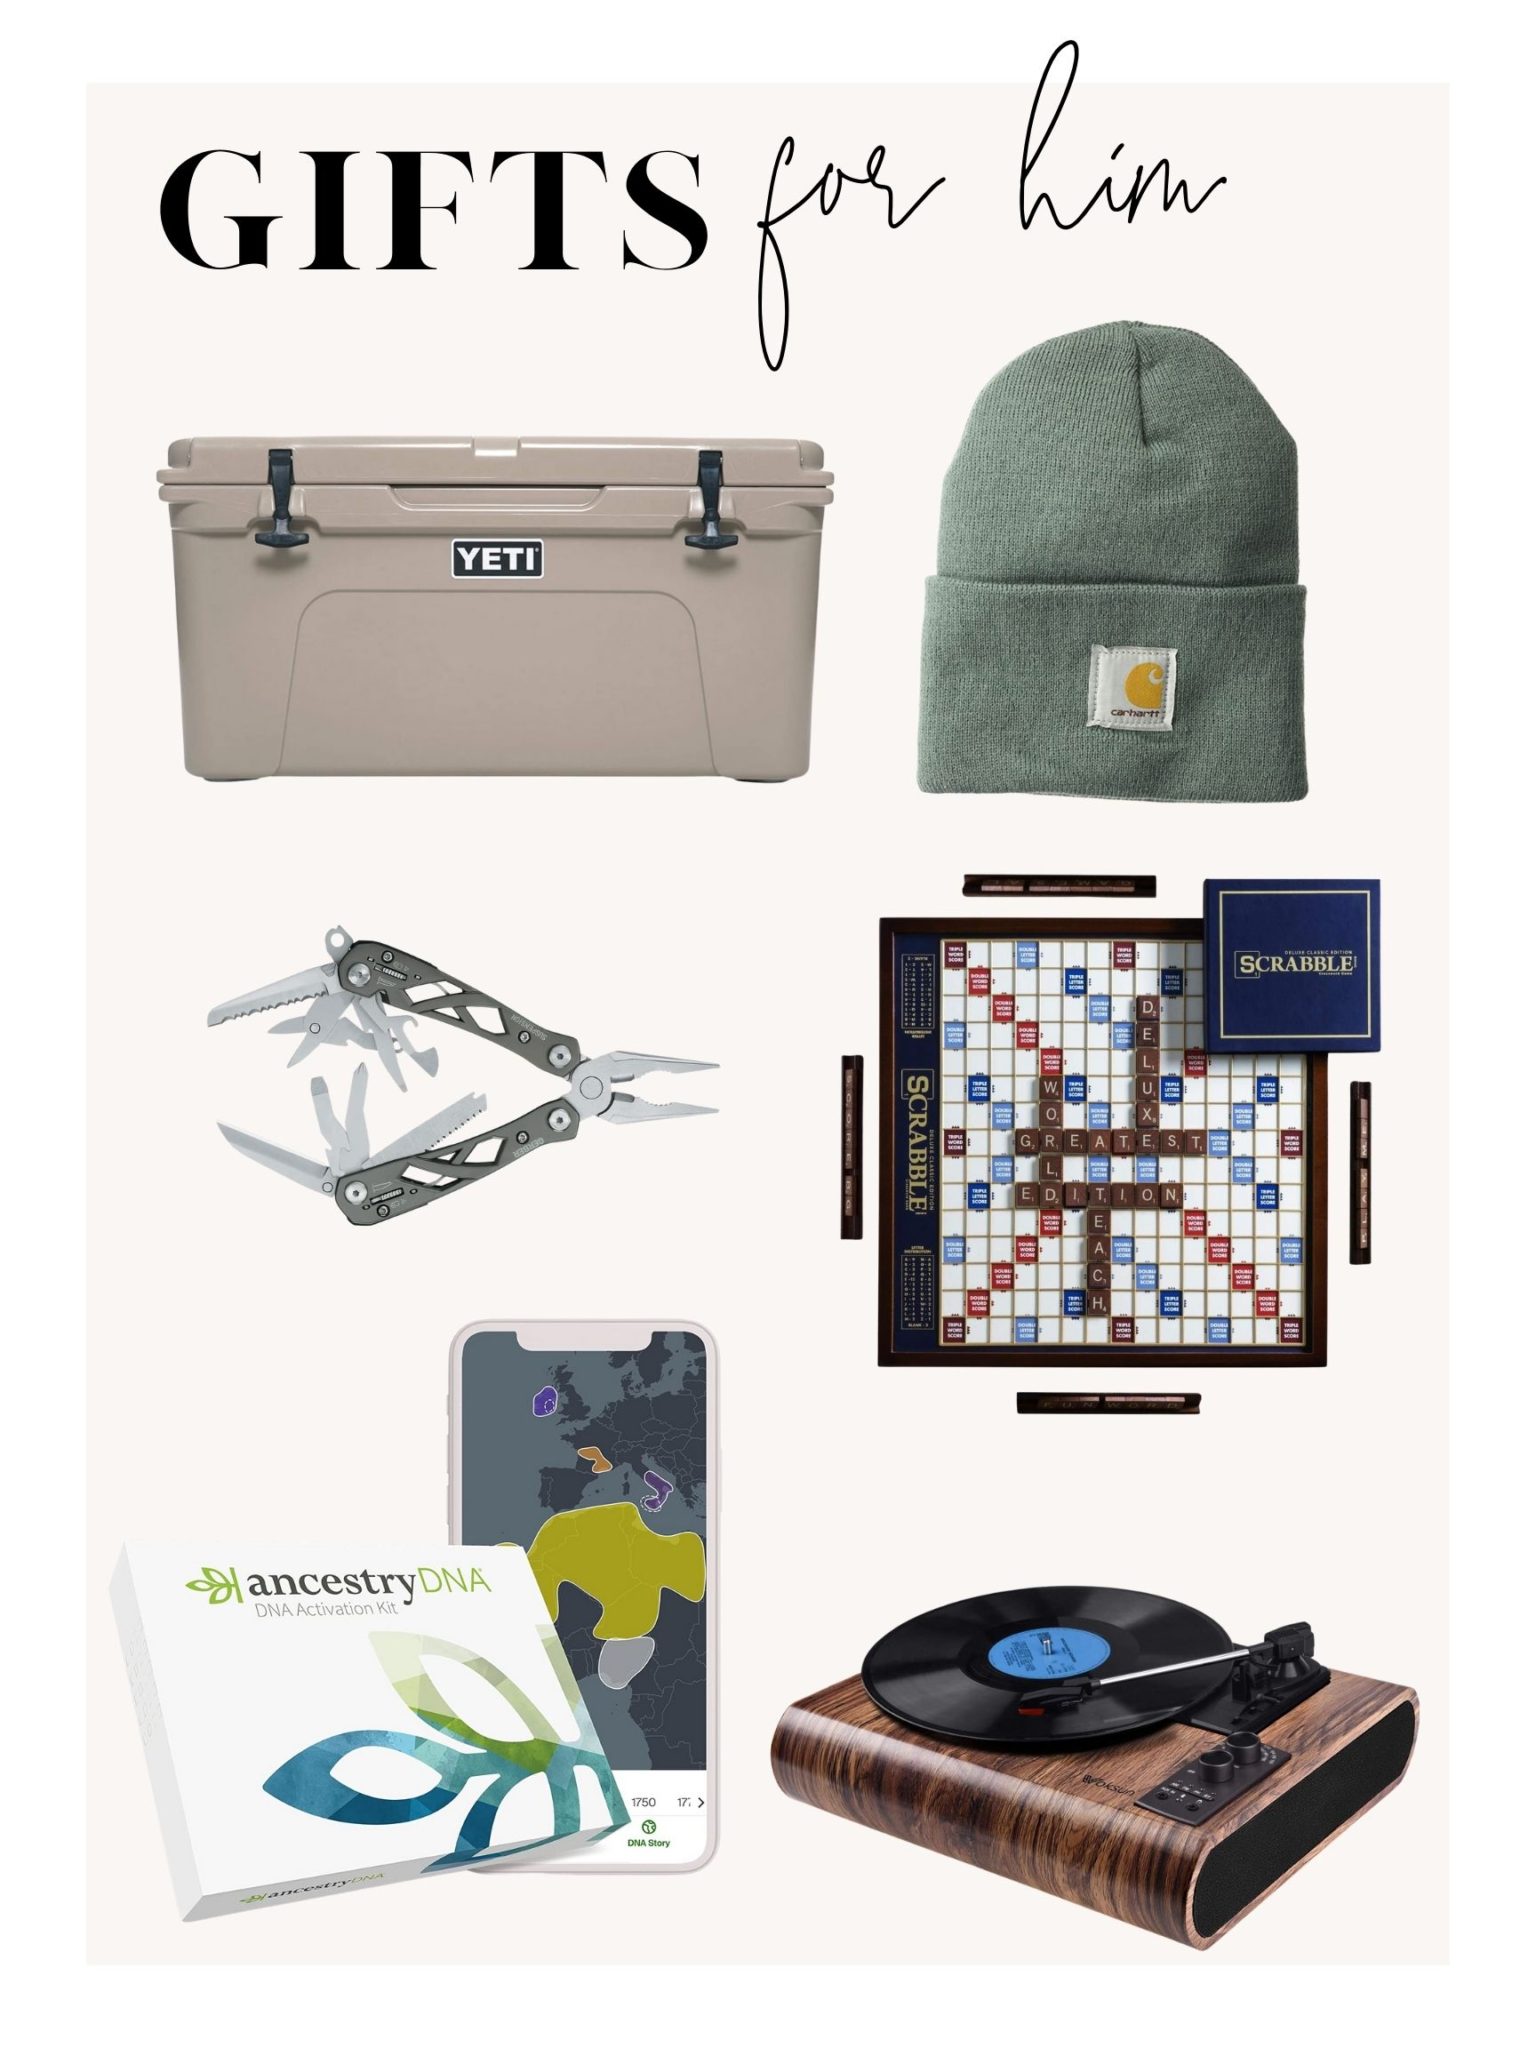 Amazon Holiday Gift Guide Presents for Every Budget